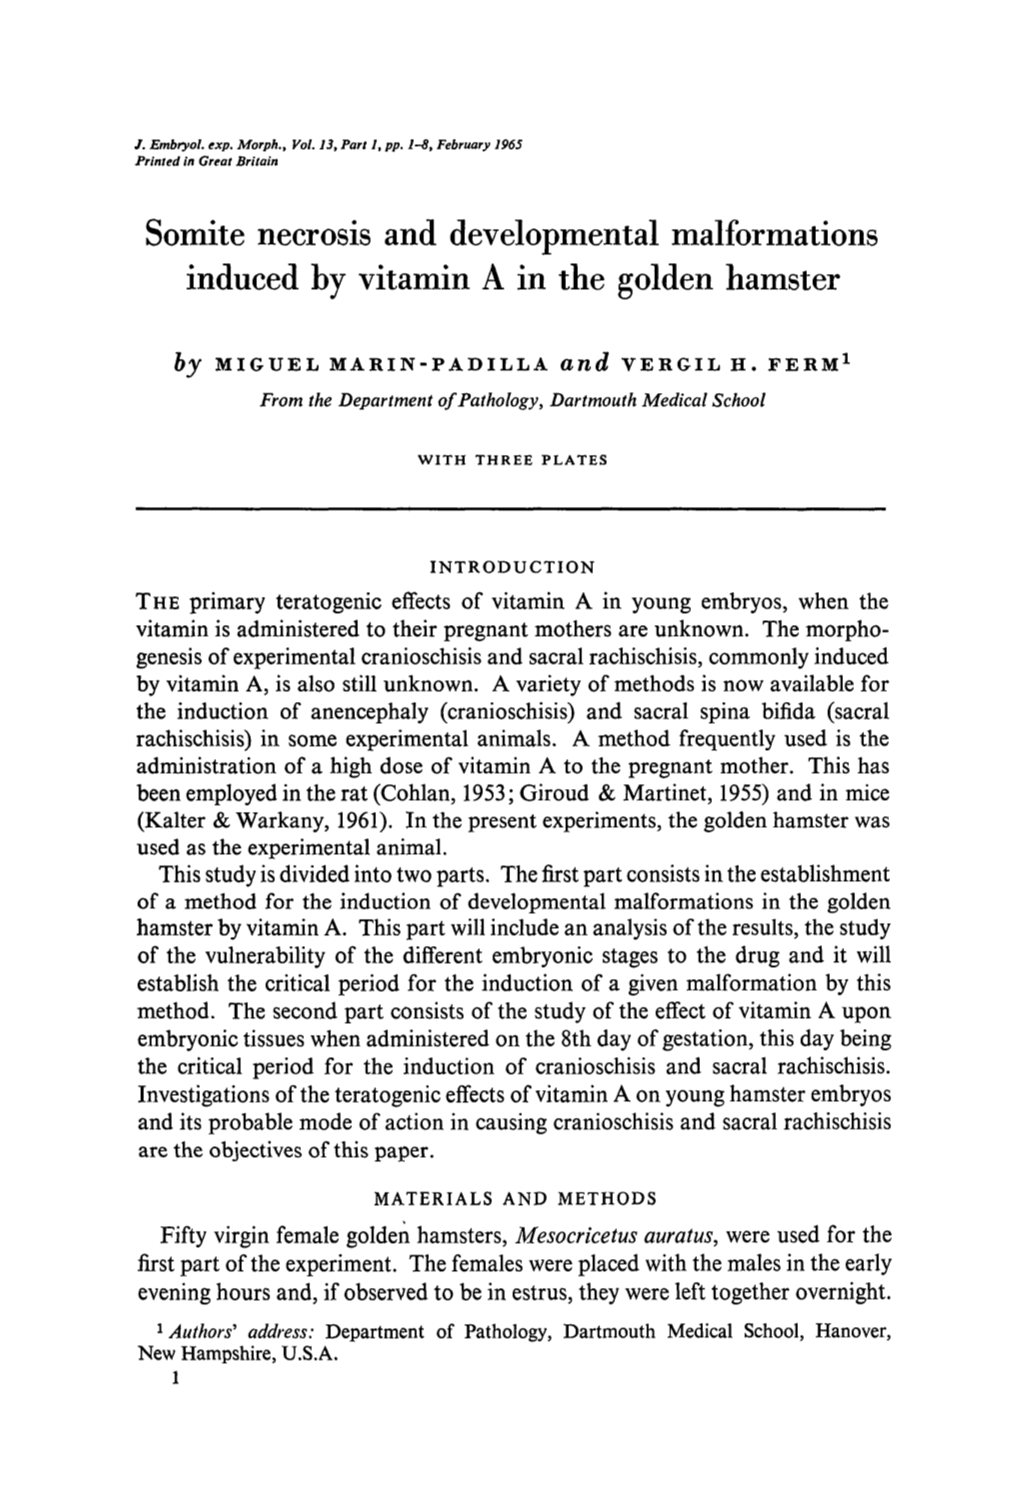 Somite Necrosis and Developmental Malformations Induced by Vitamin a in the Golden Hamster